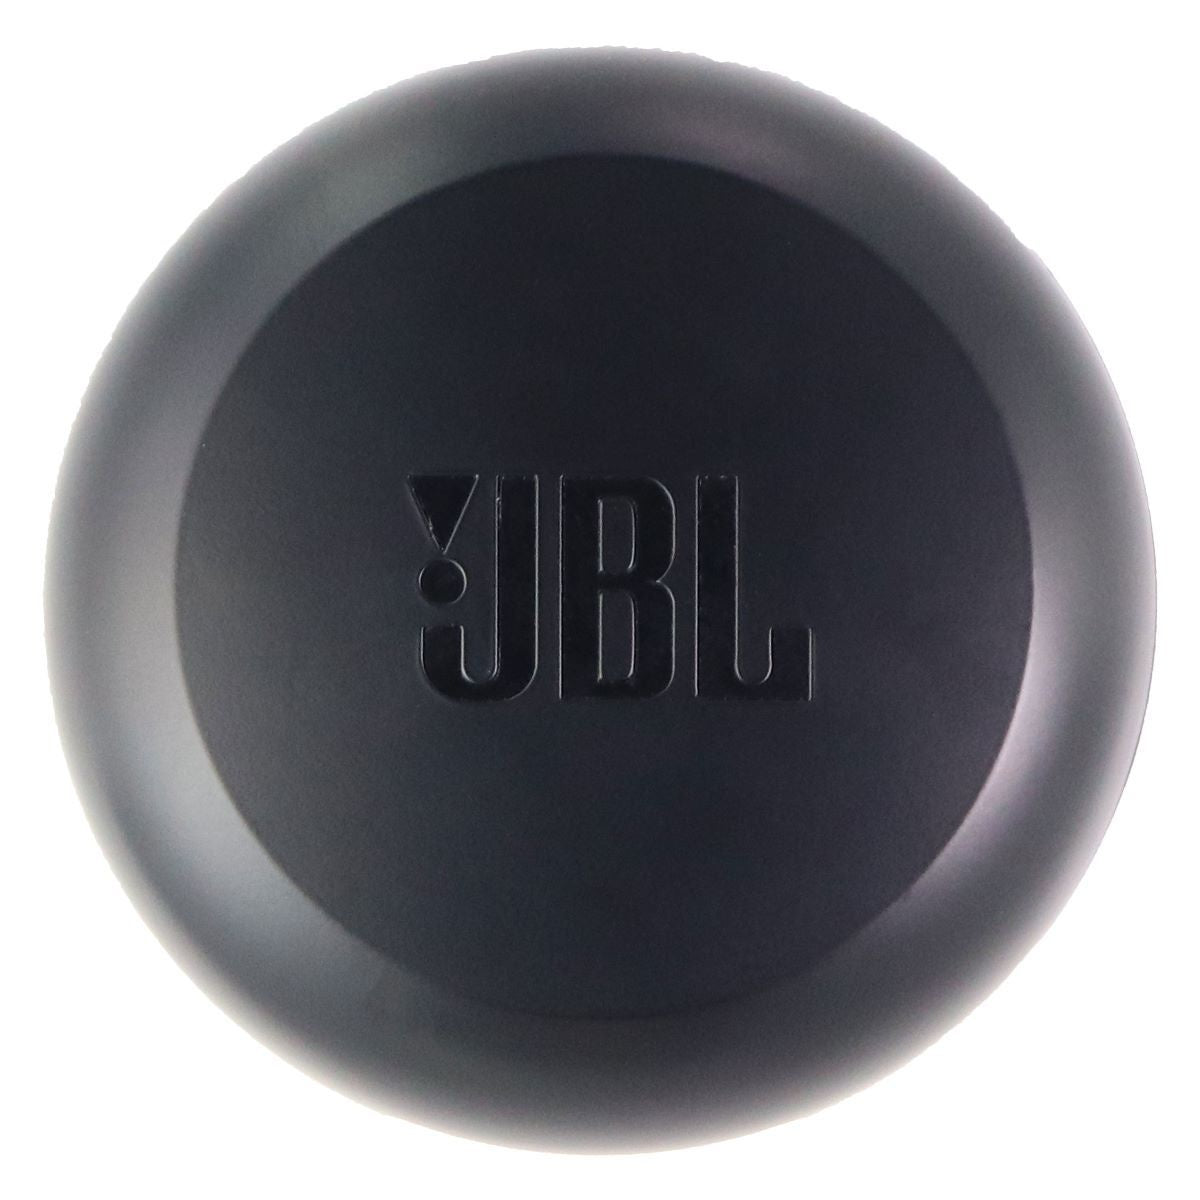 JBL Replacement Charging Case for FREEX Headphones - Black Portable Audio & Headphones - Replacement Parts & Tools JBL    - Simple Cell Bulk Wholesale Pricing - USA Seller